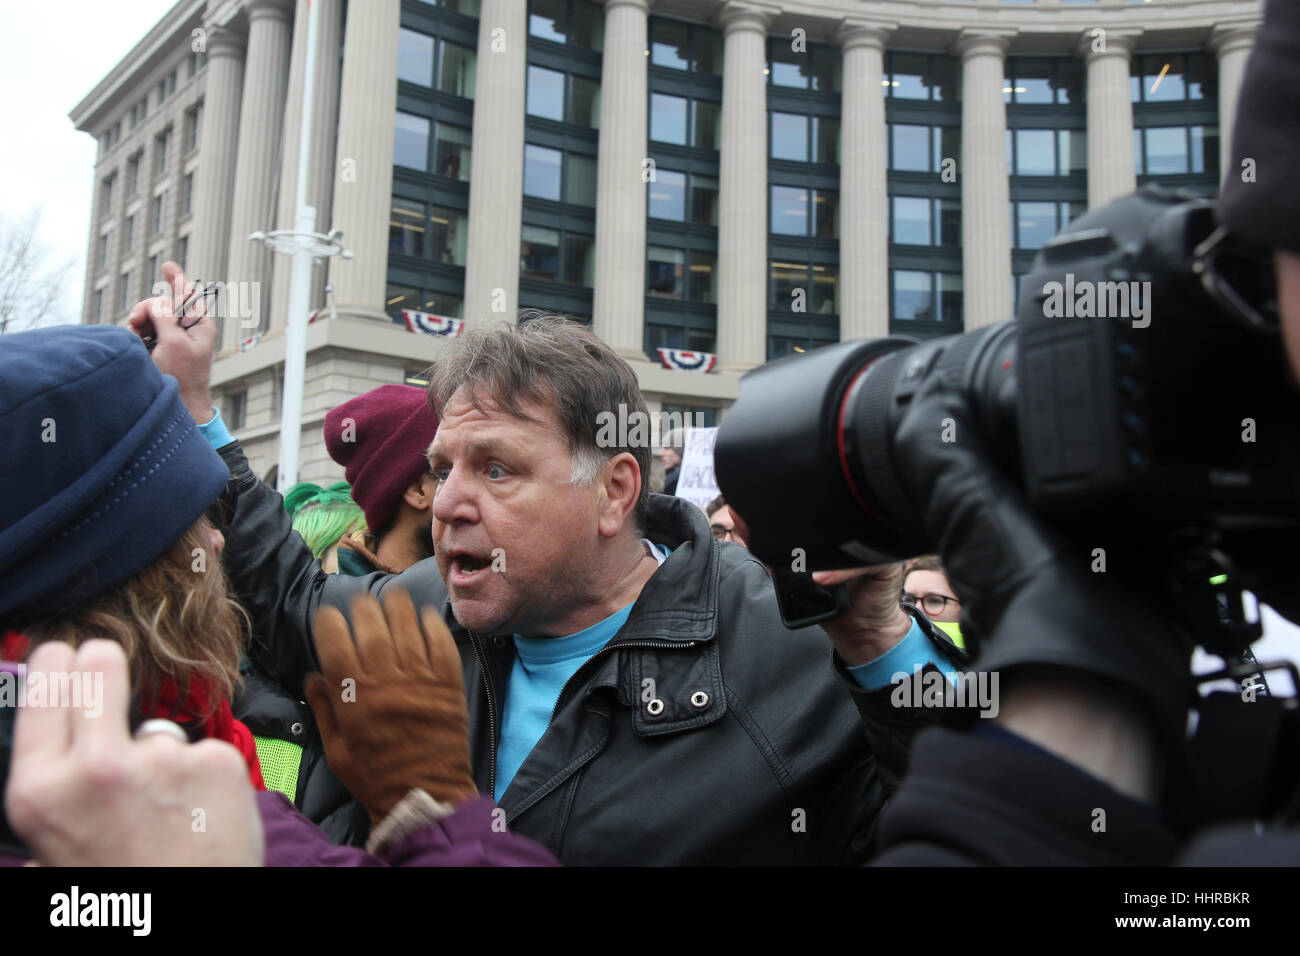 Washington, USA. 20th January, 2017. A Trump supporter confronts protesters at rally held by the ANSWER Coalition on the day of the inauguration of Donald J Trump as President of the United States. Credit: Susan Pease/Alamy Live News Stock Photo